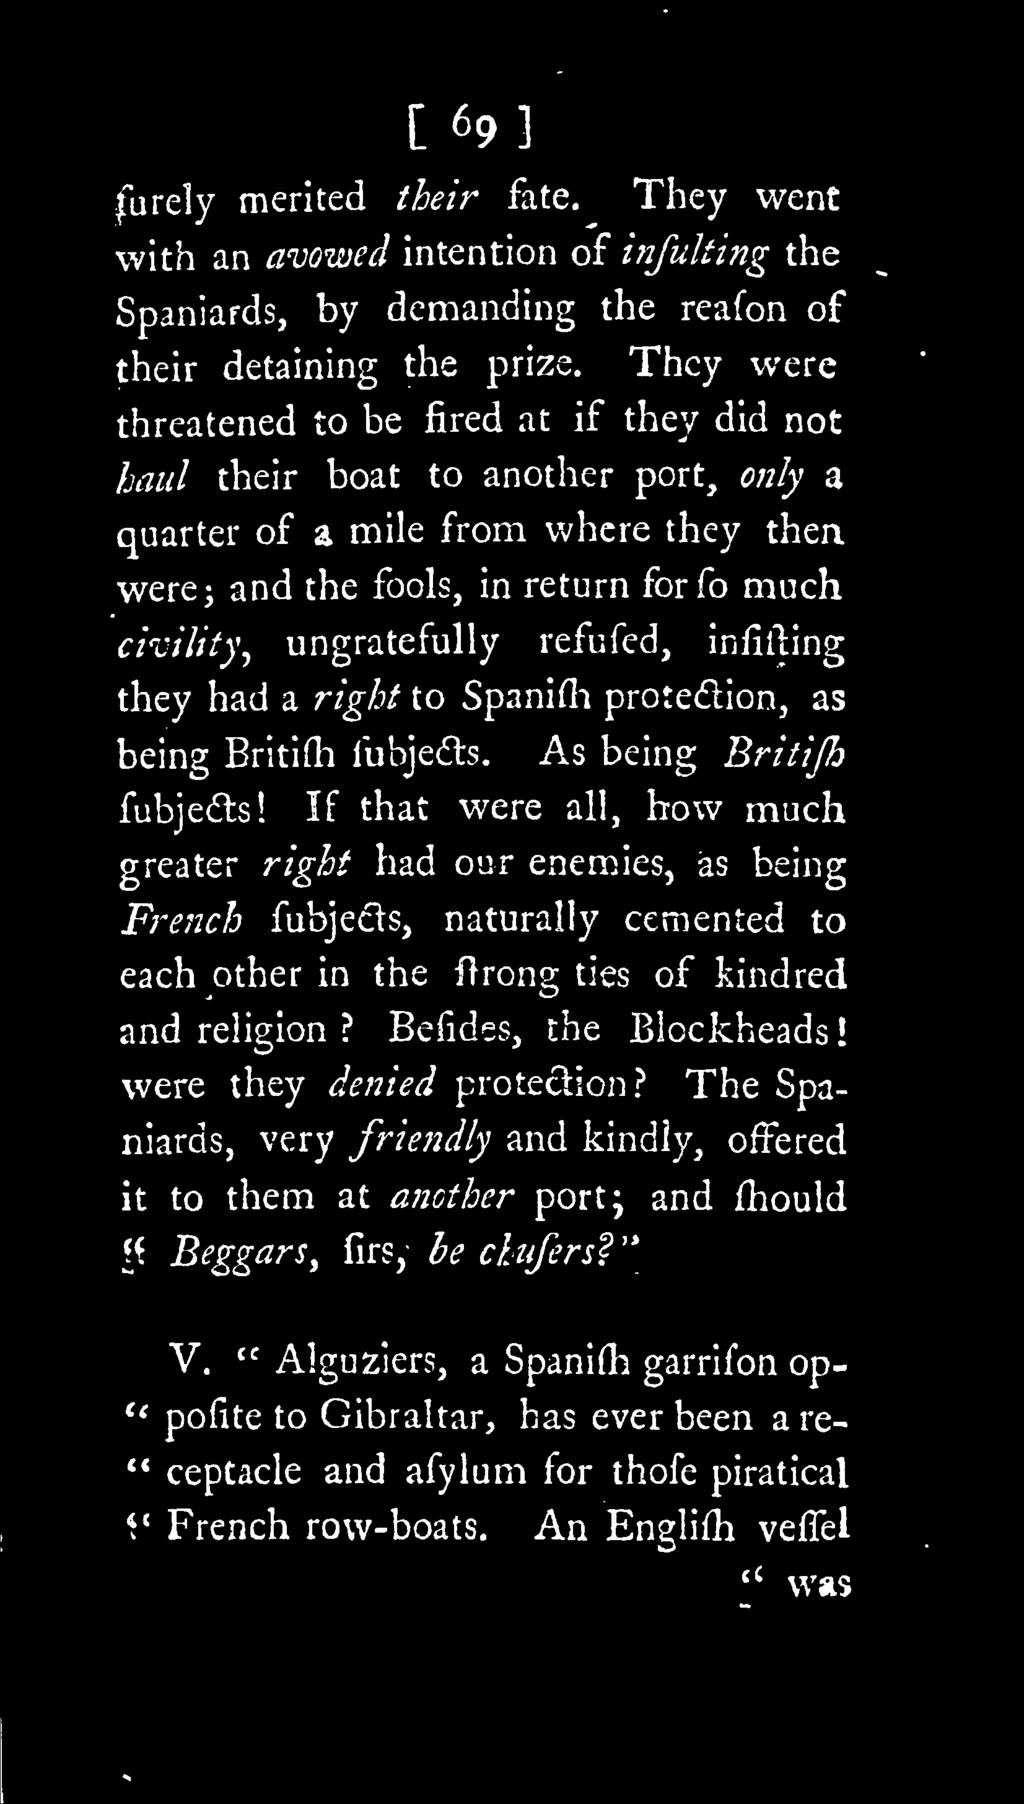 Befides, the Blockheads! were they denied protection? The Spaniards, very friendly and kindly, offered it to them at another port; and mould?